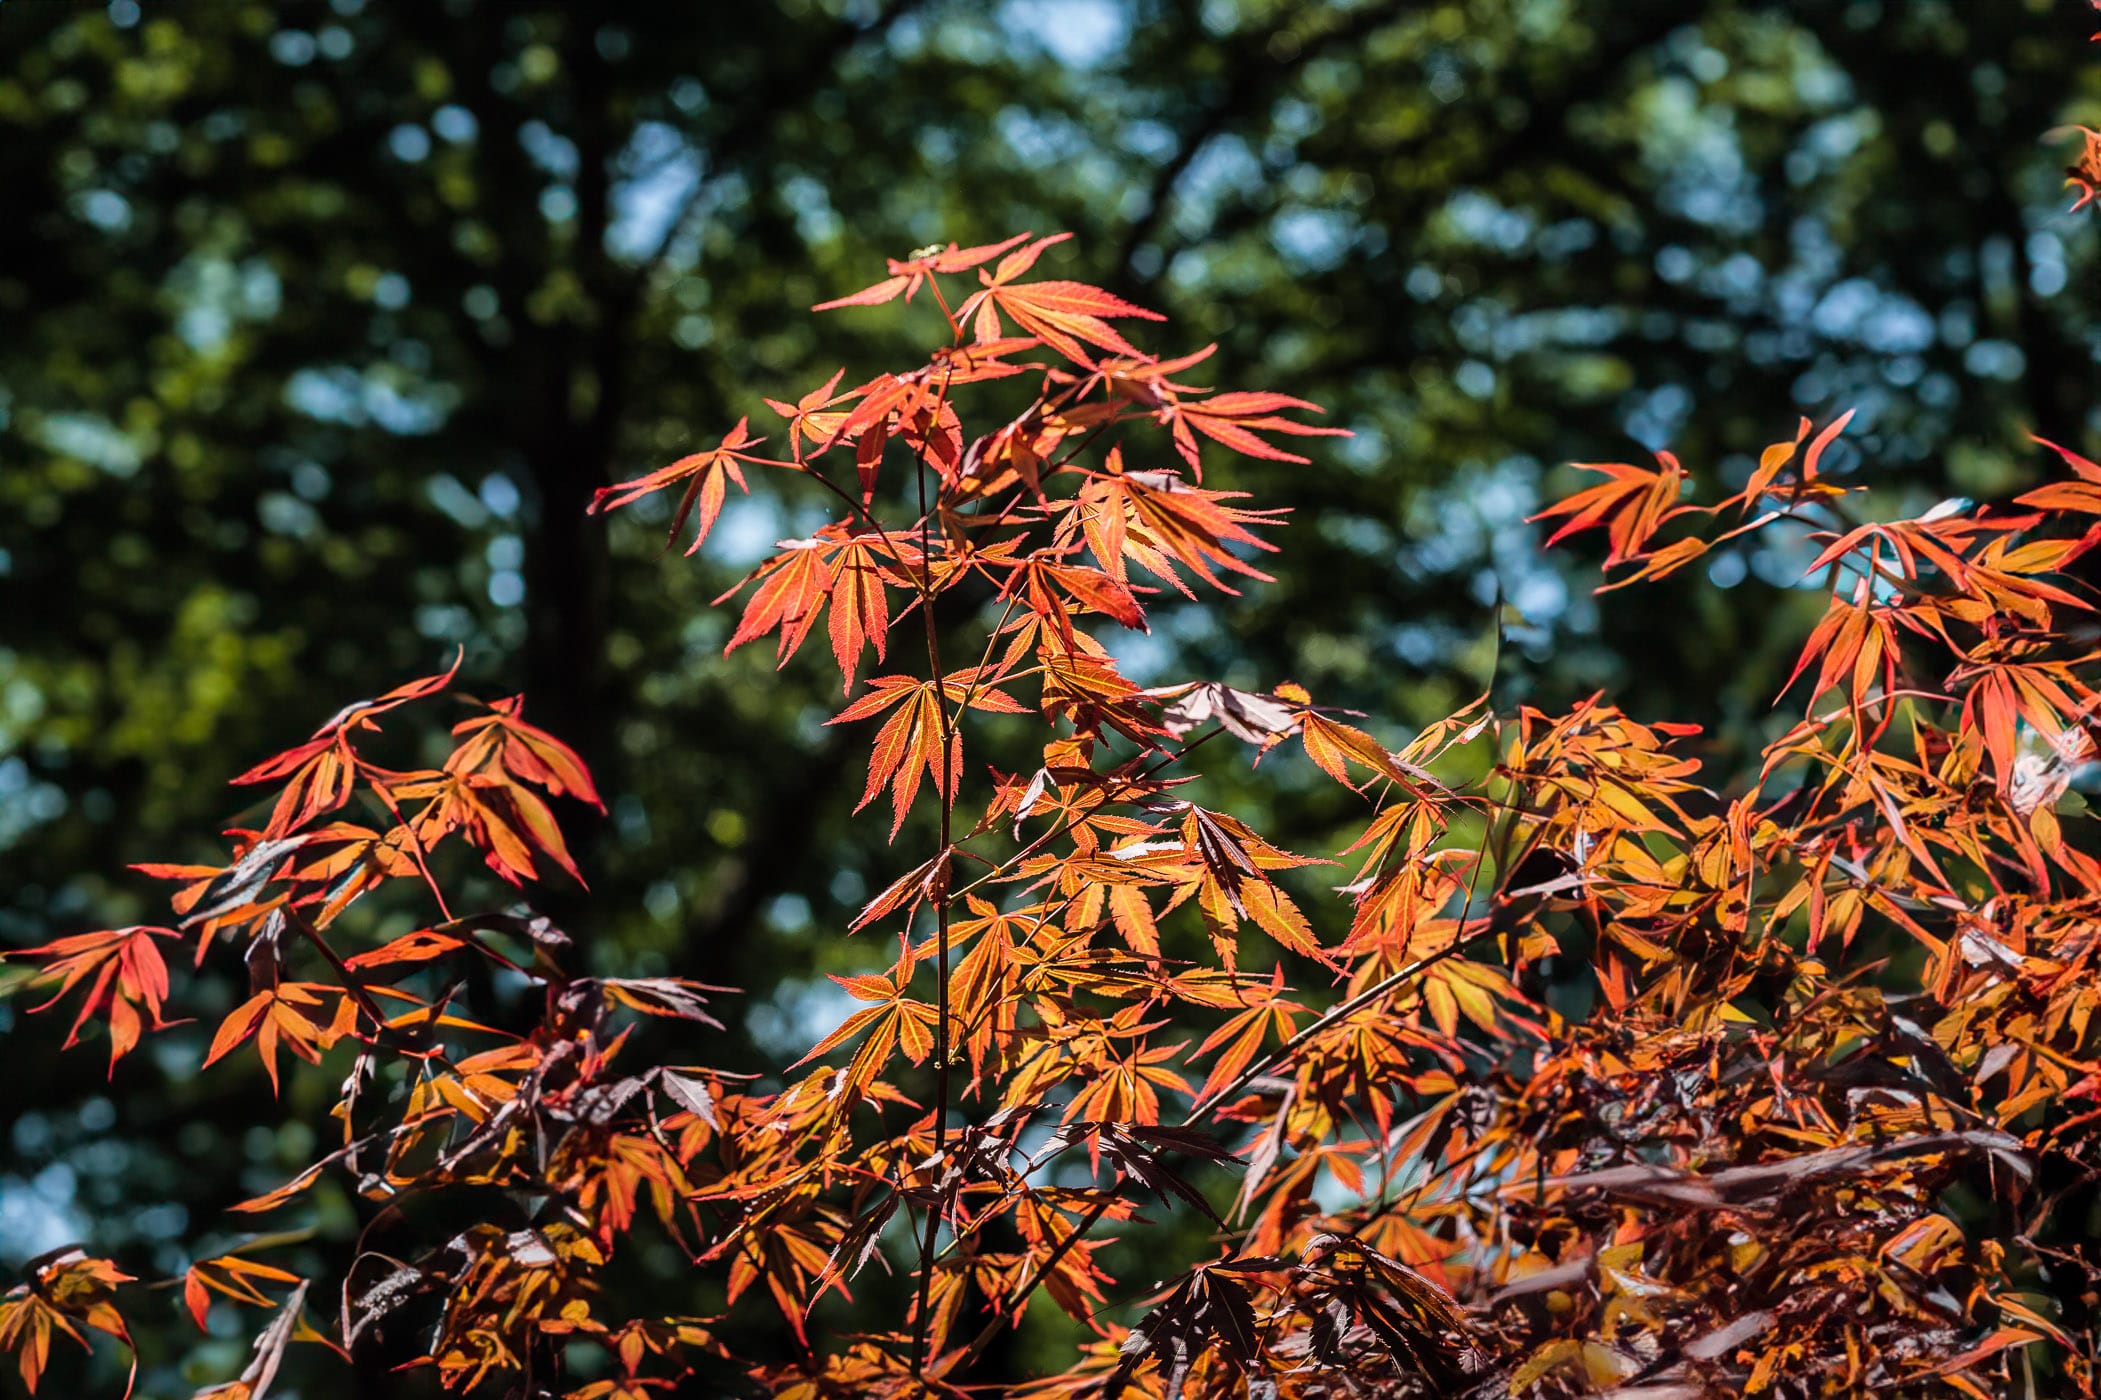 A Japanese maple tree, shot at my mother's house in Tyler, Texas.